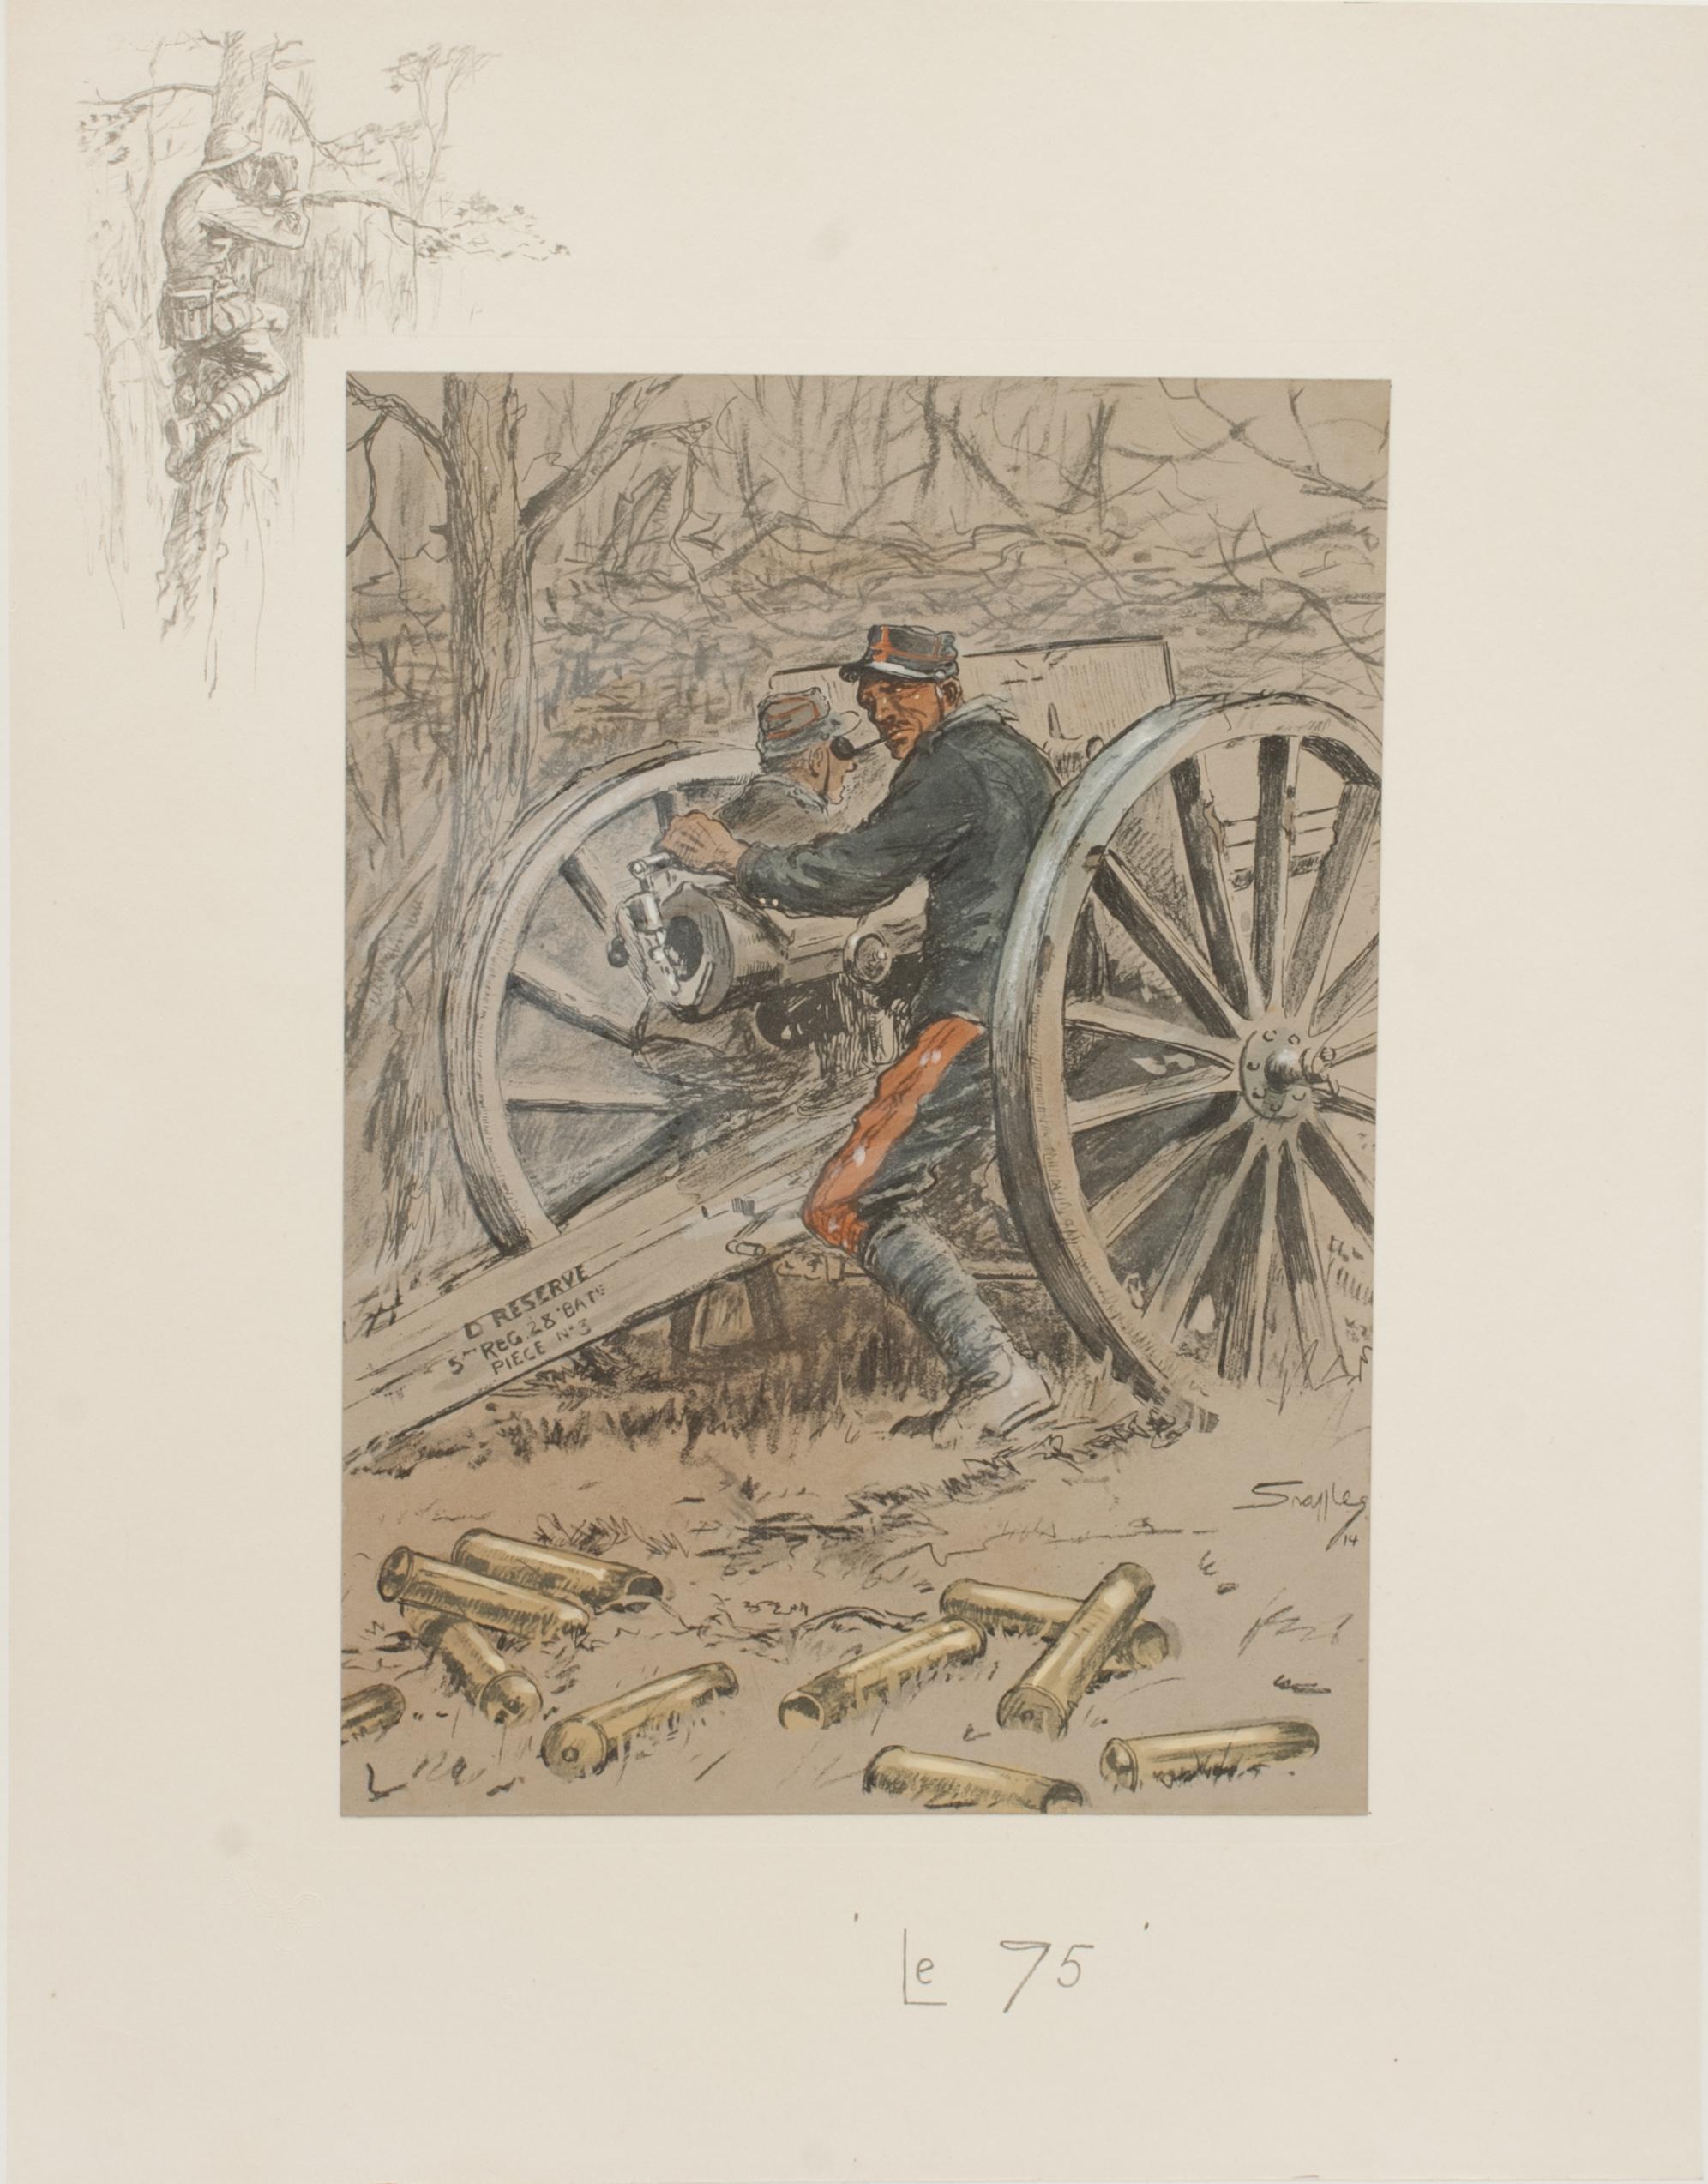 Vintage Snaffles WWI Military Print, Le 75.
A good Snaffles WWI military print 'Le 75', the main center colour-piece hand coloured lithograph is mounted onto the printed remarque board. The lithograph shows a French artillery man firing a 75 mm